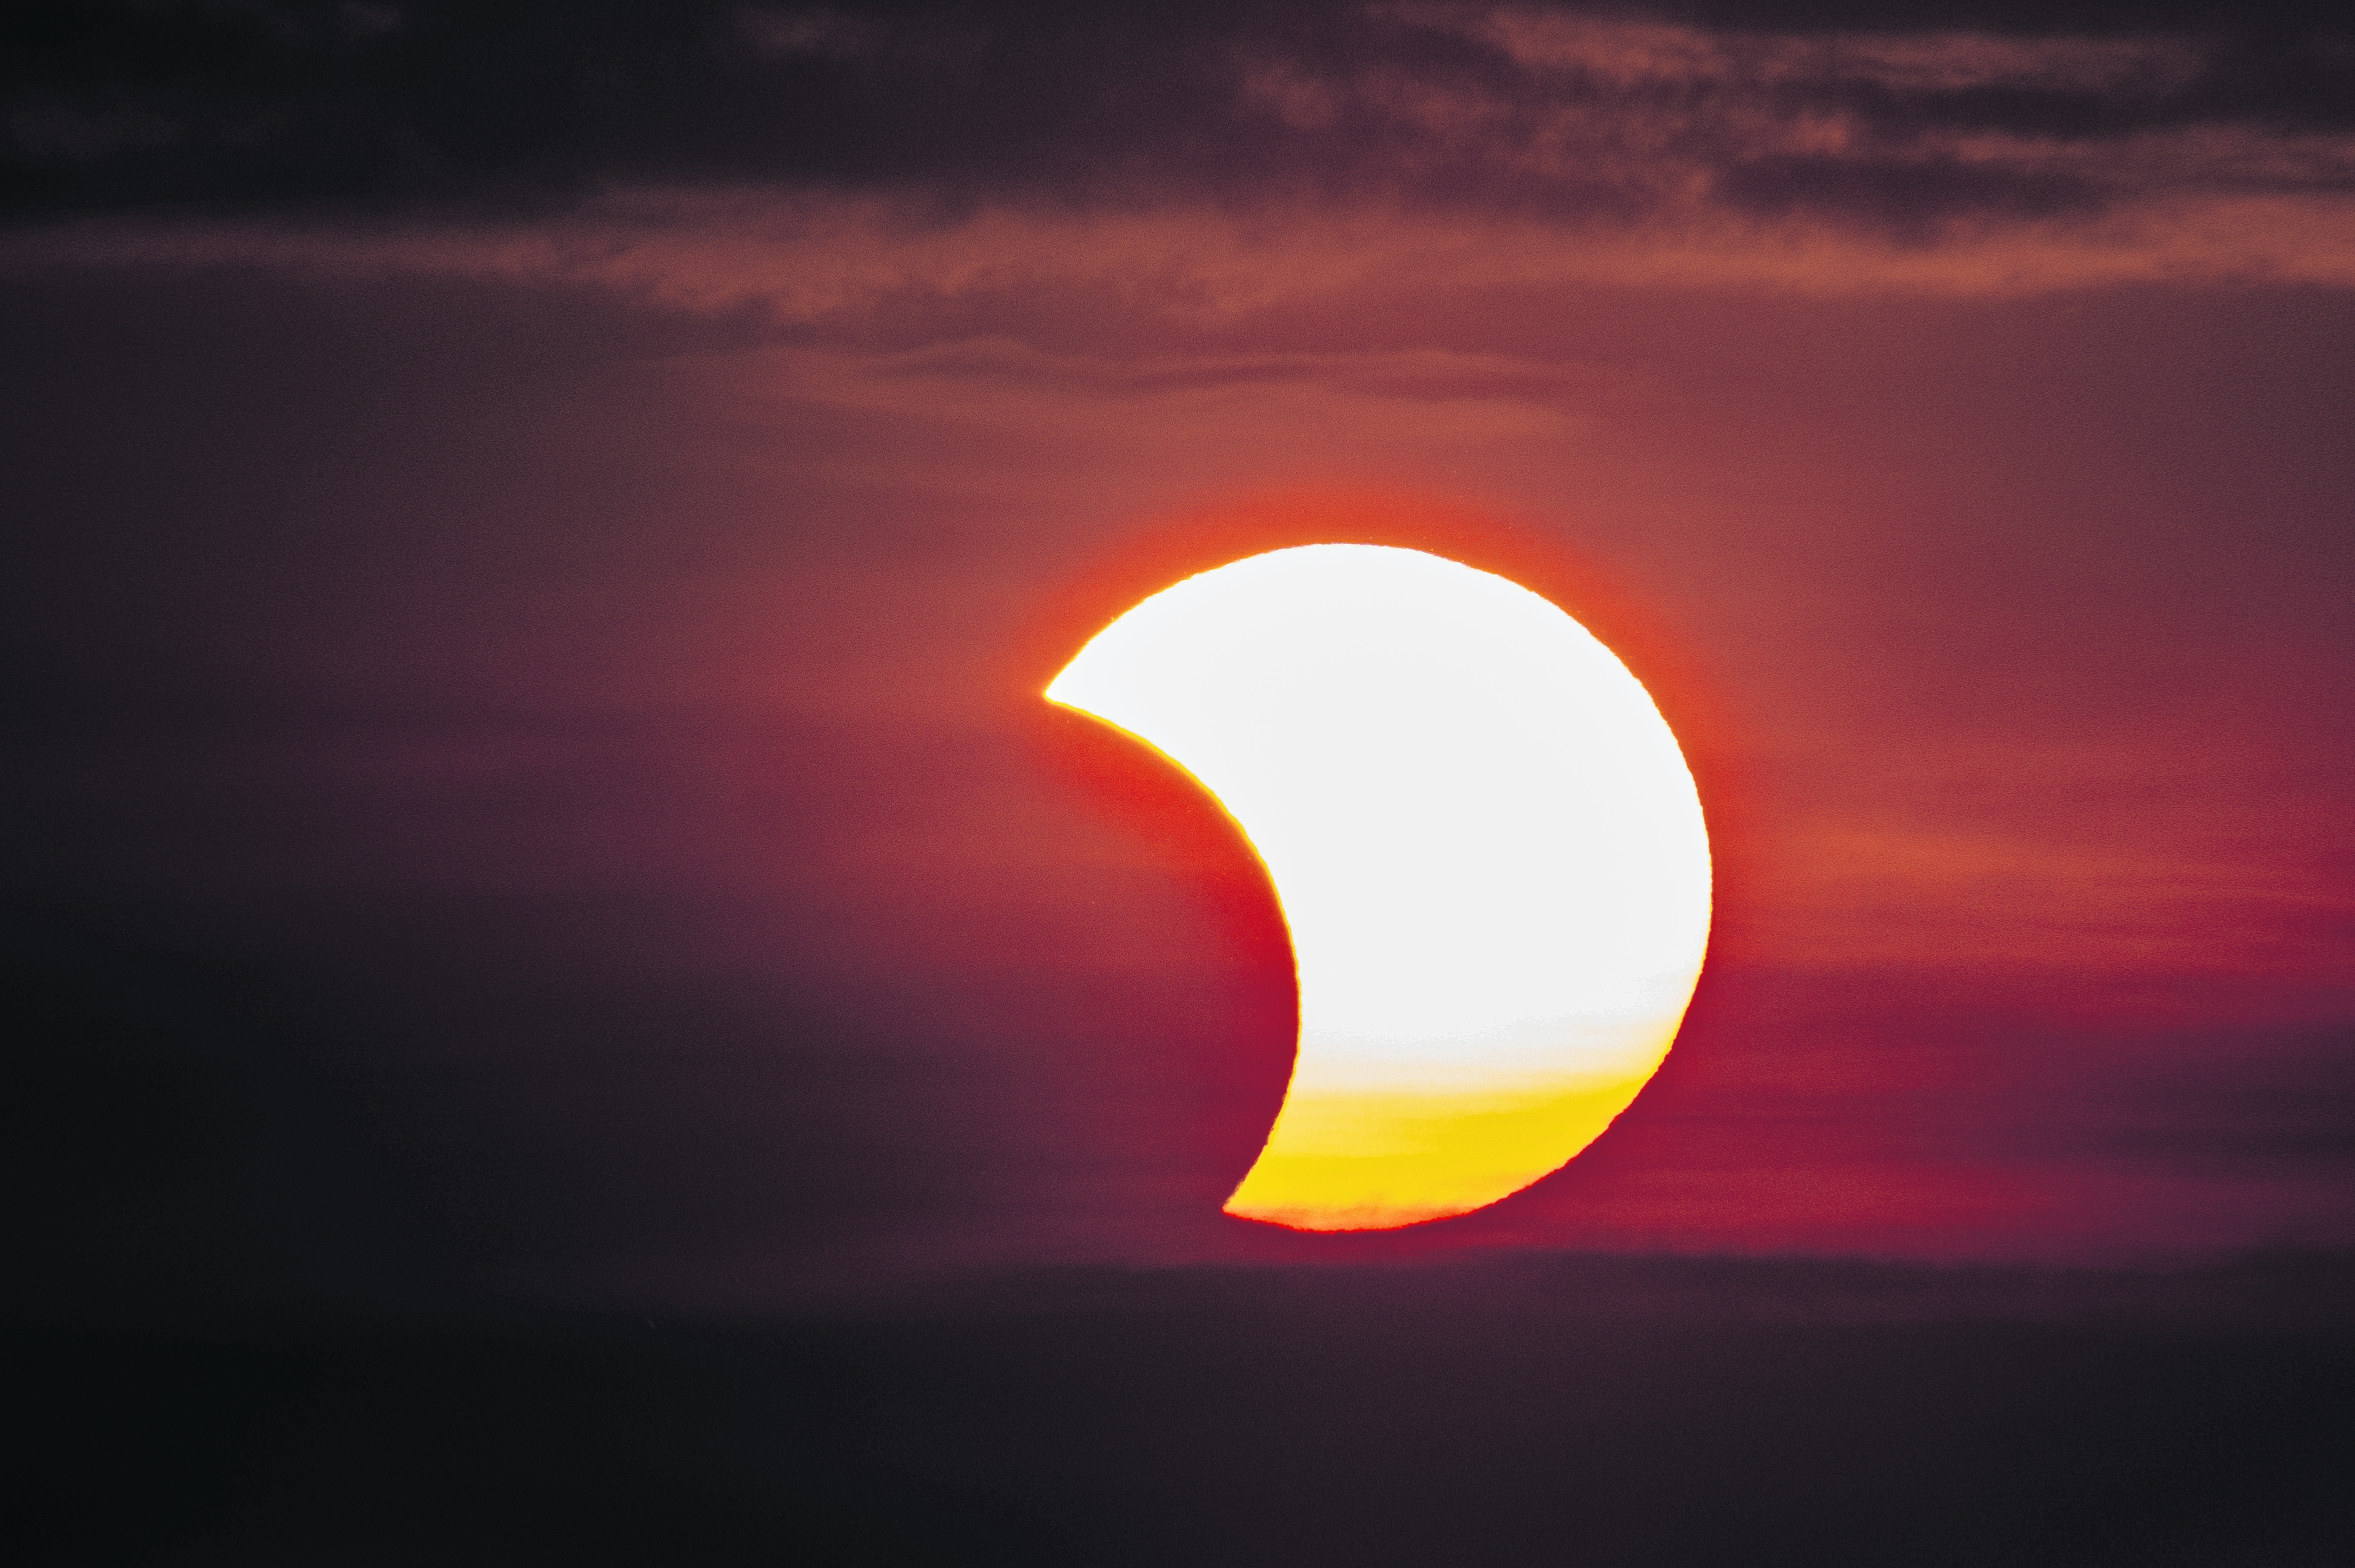 A “Ring of Fire” eclipse will create a crescent sun for sky watchers in Michigan this week